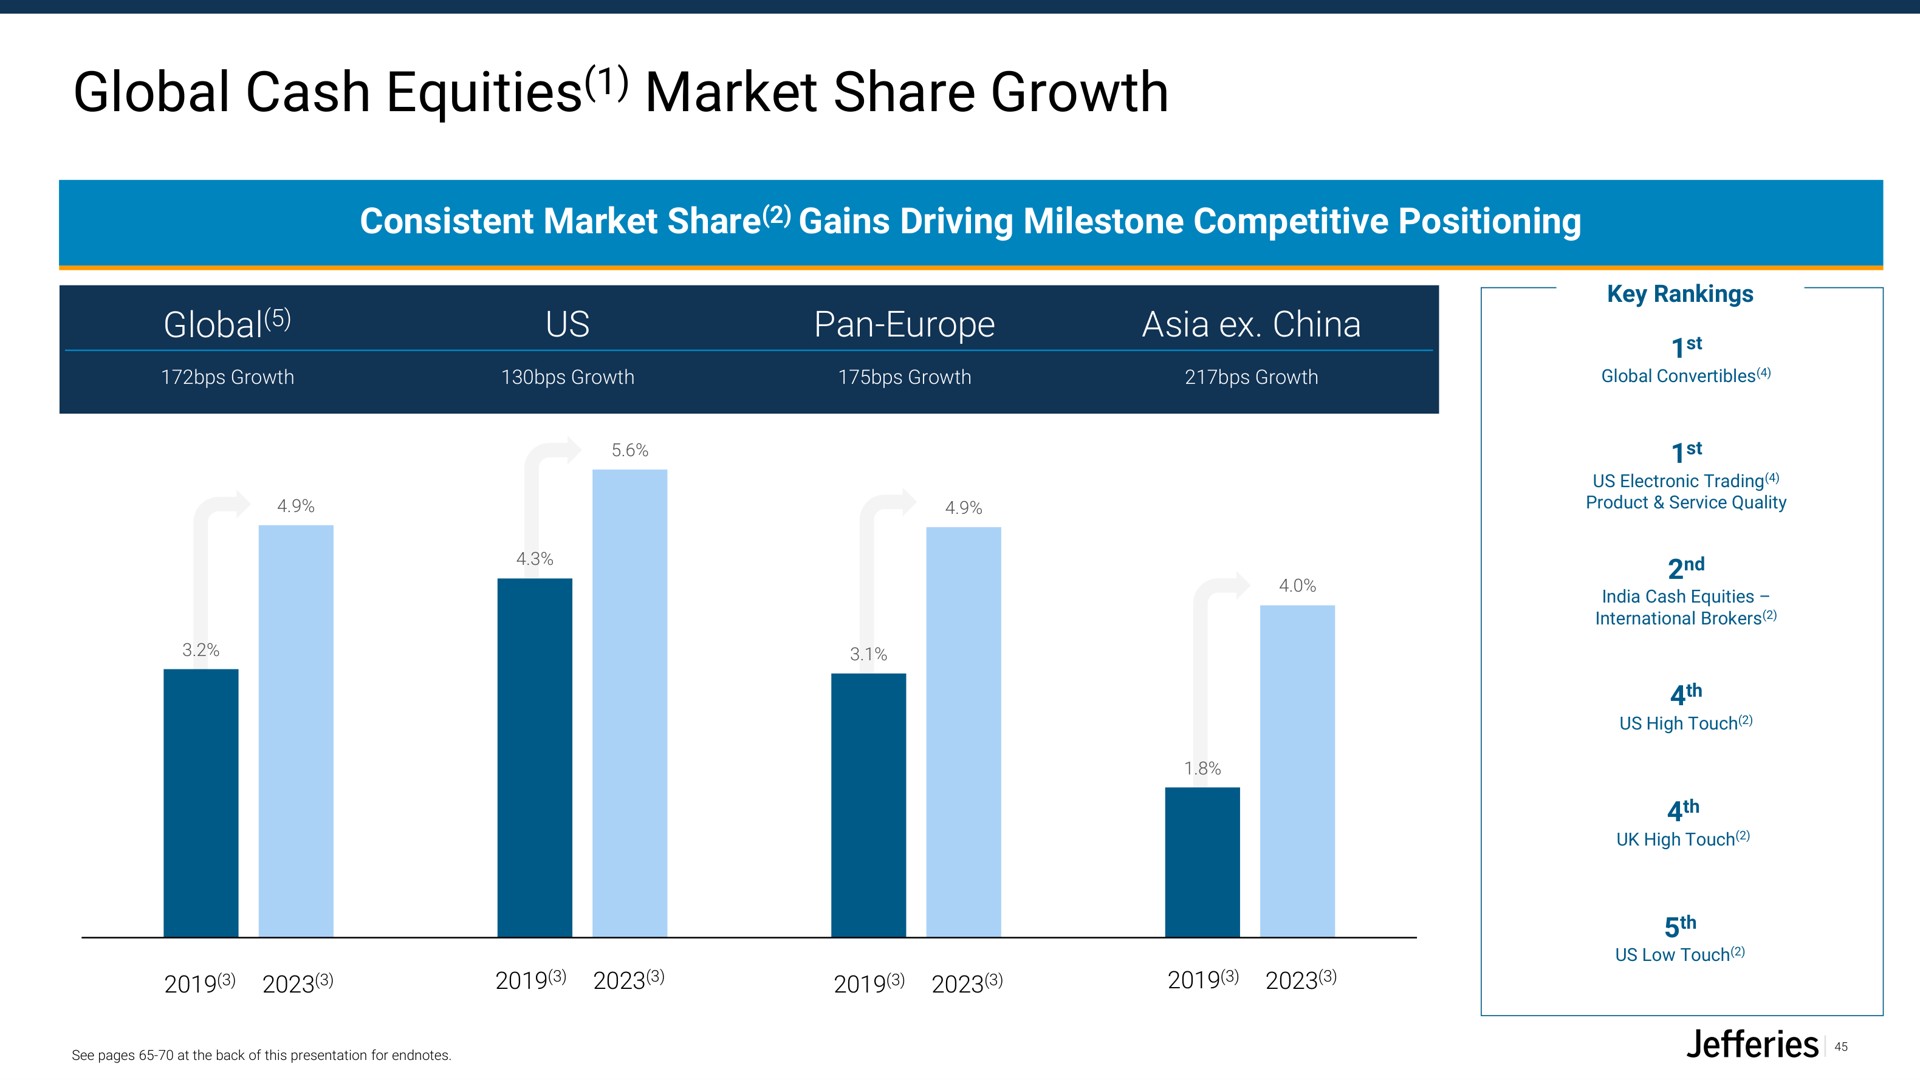 global cash equities market share growth consistent gains driving milestone competitive positioning pan china | Jefferies Financial Group